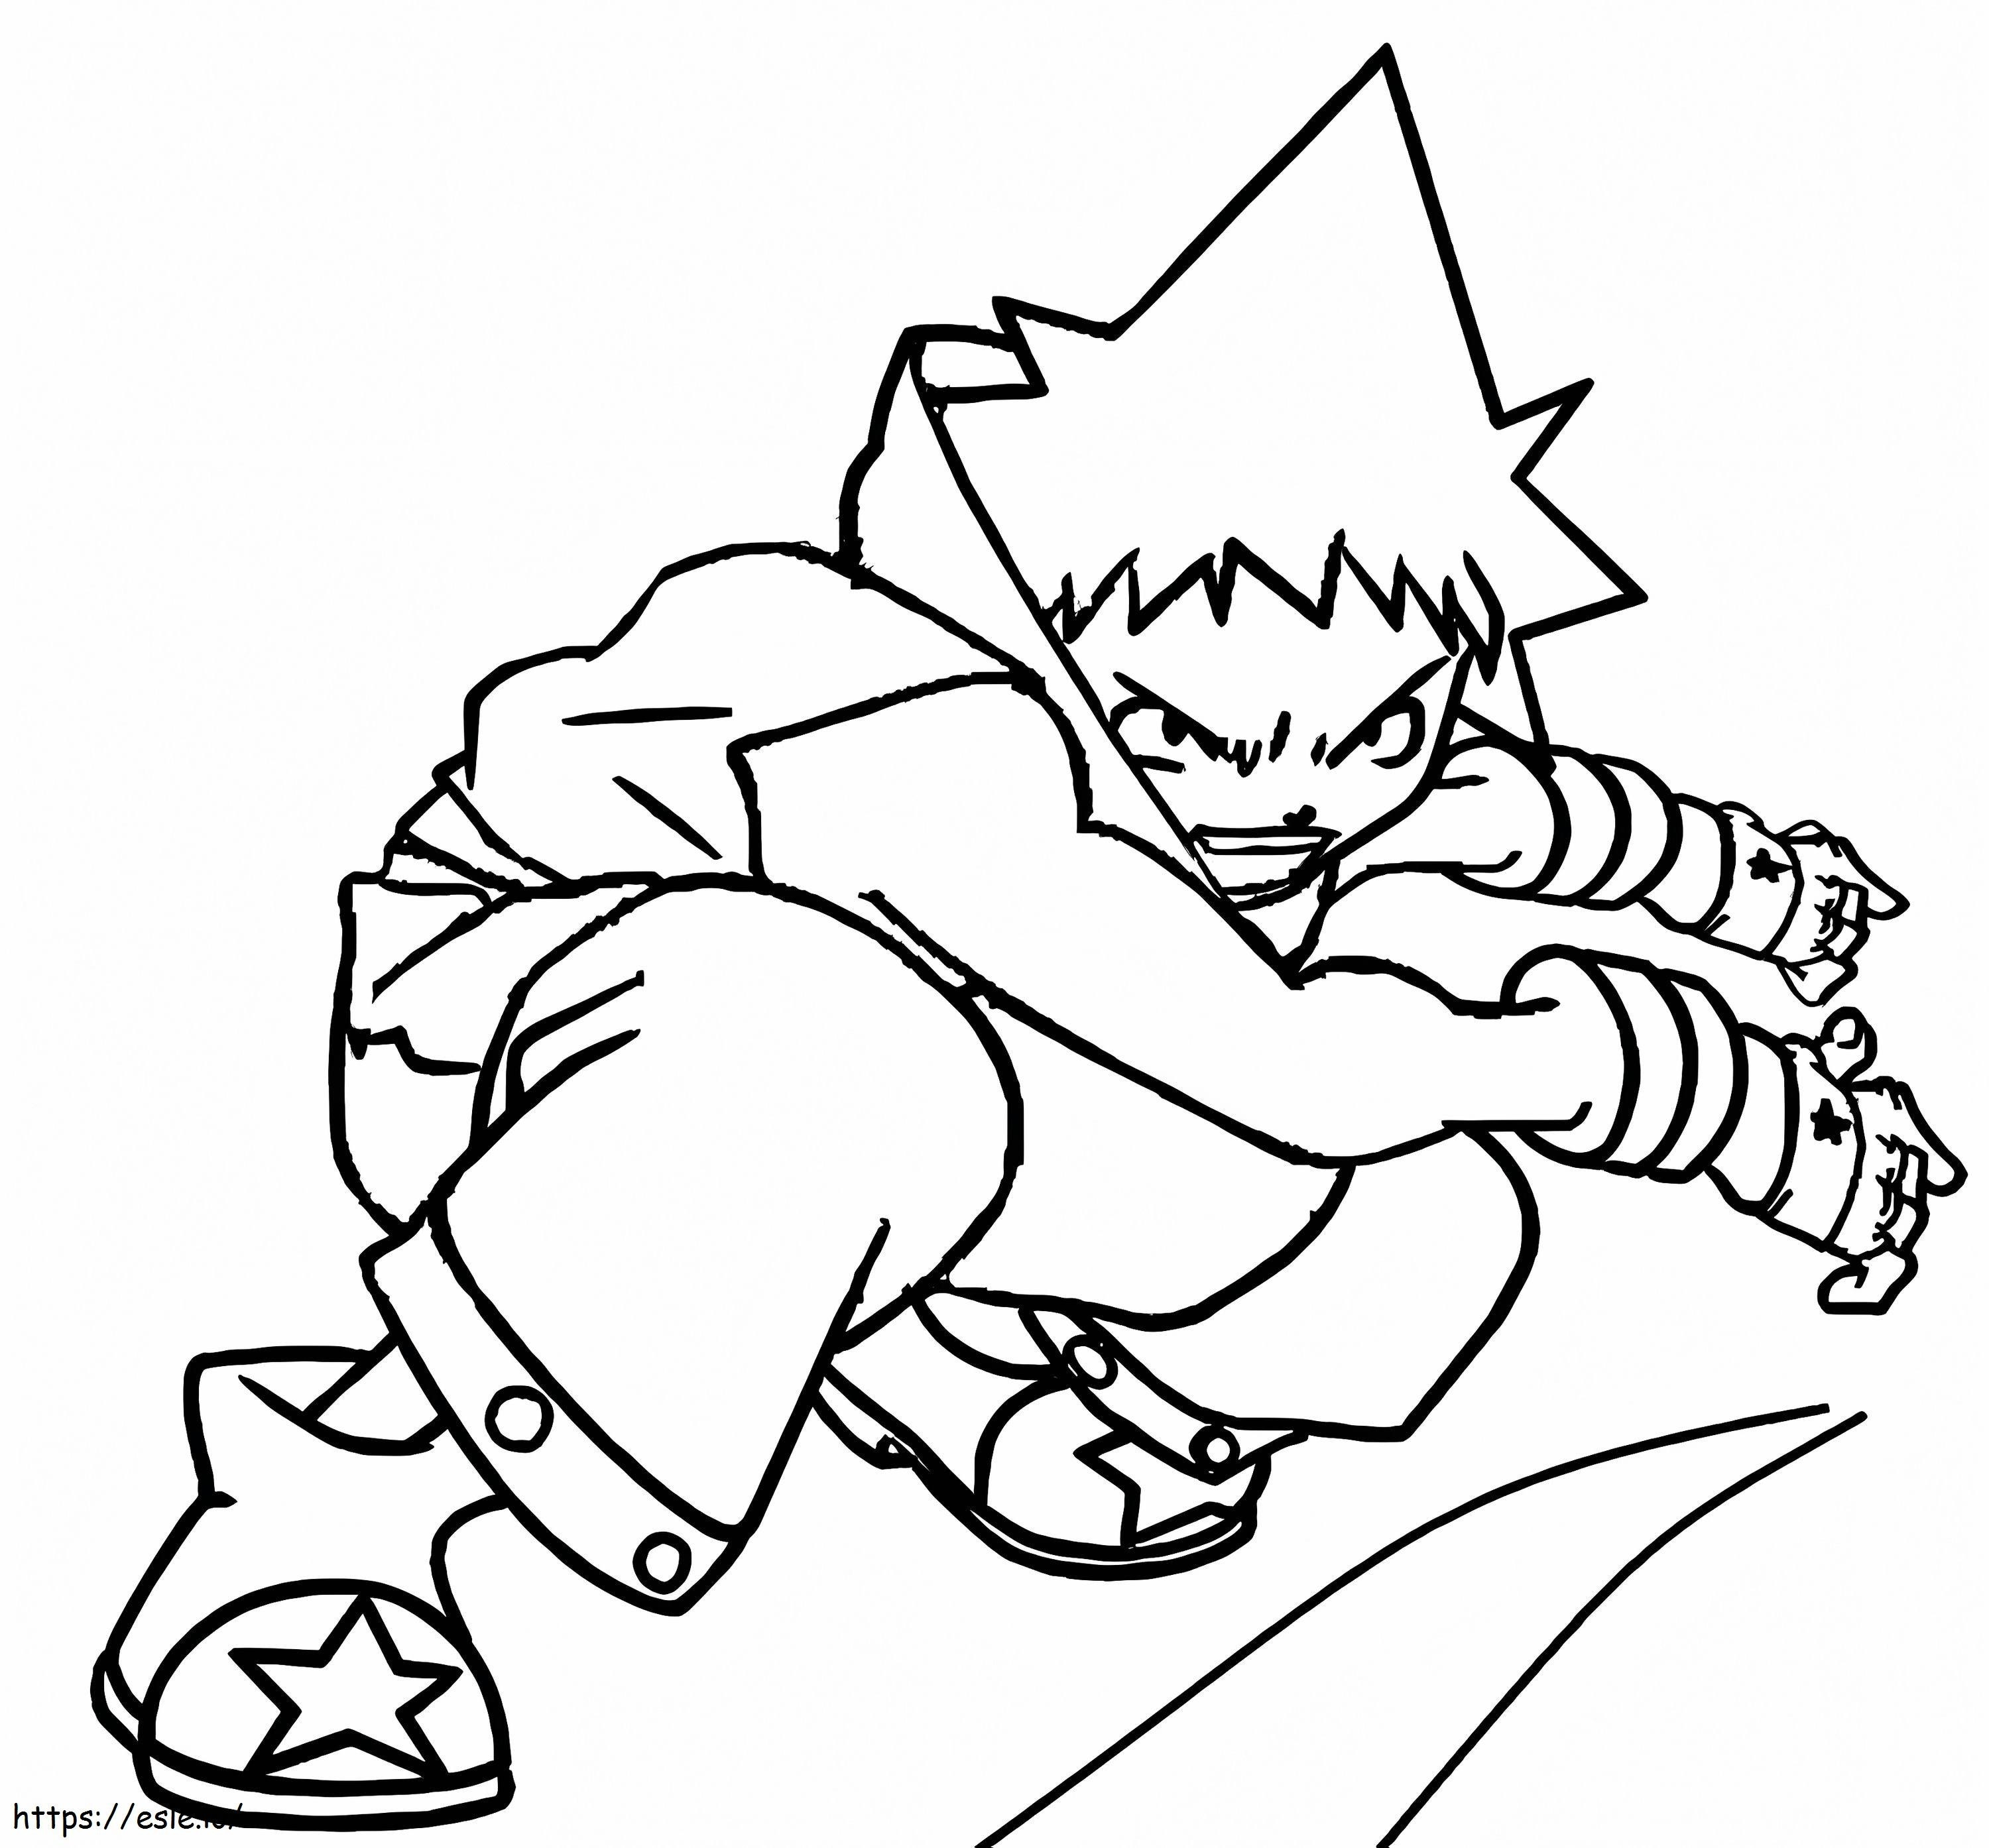 Black Star coloring page